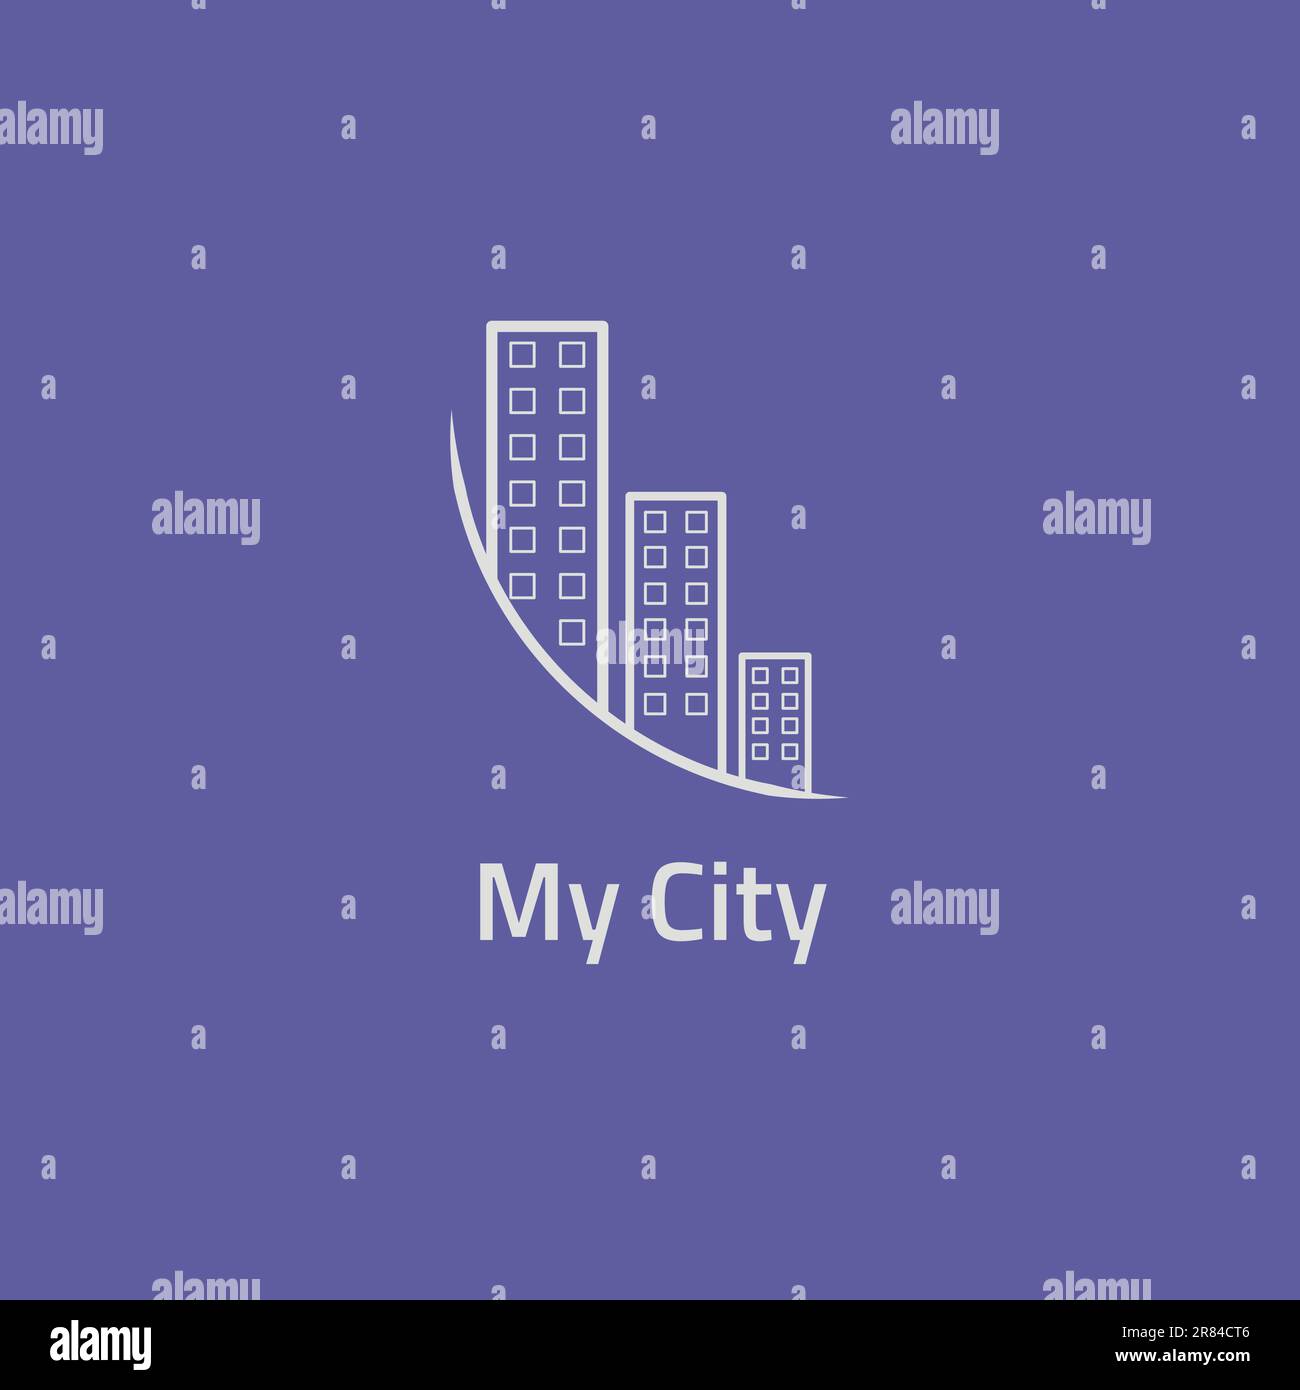 Simple city logo over curved lines. Stock Vector